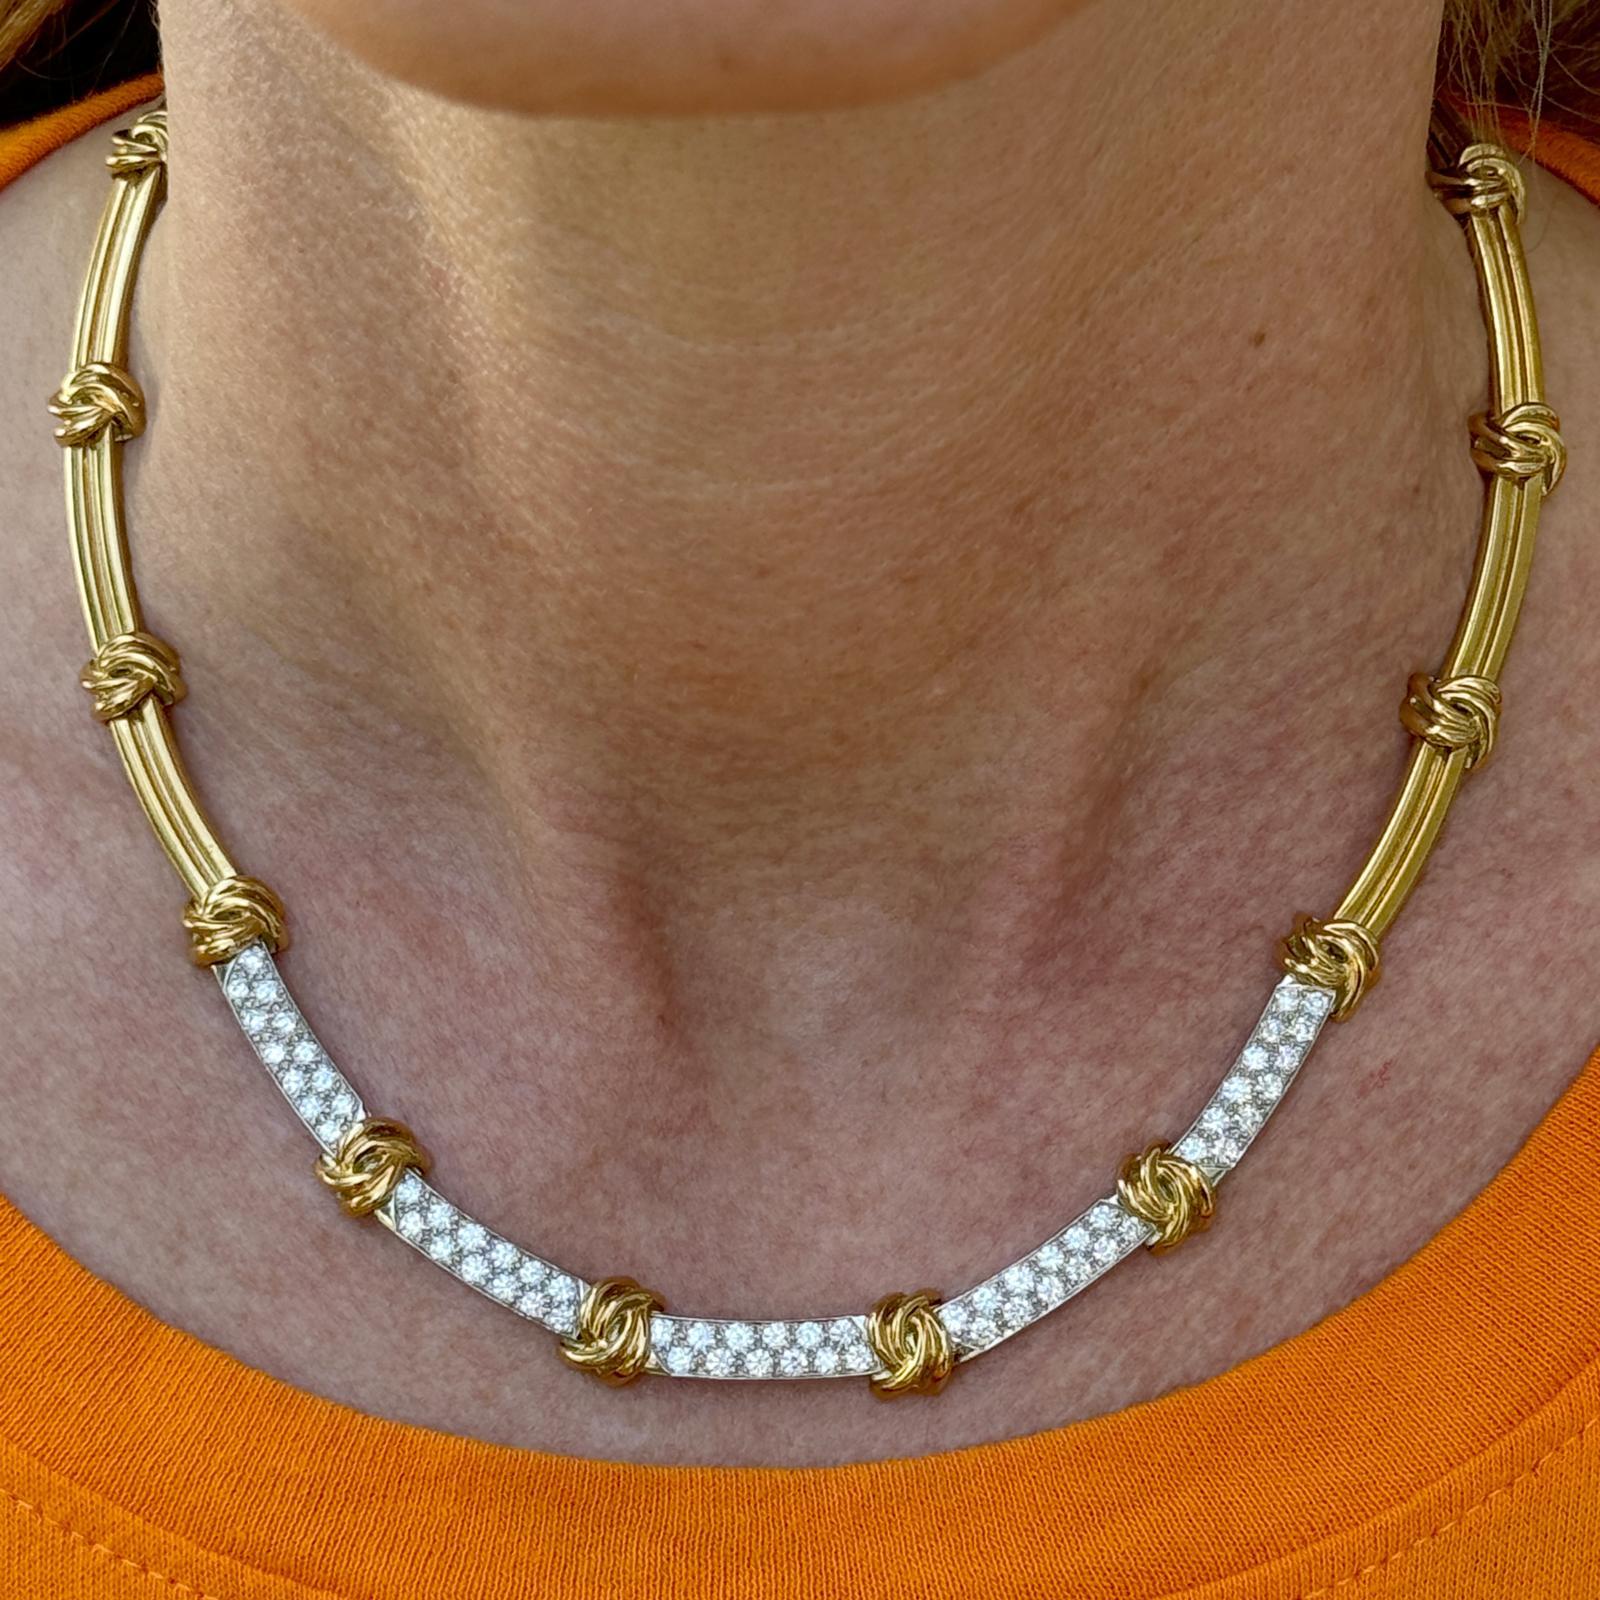 This Tiffany & Company diamond link necklace is a breathtaking piece of jewelry that epitomizes elegance and luxury. Crafted with exquisite craftsmanship, this necklace features a series of interlocking diamond links set in lustrous 18 karat yellow